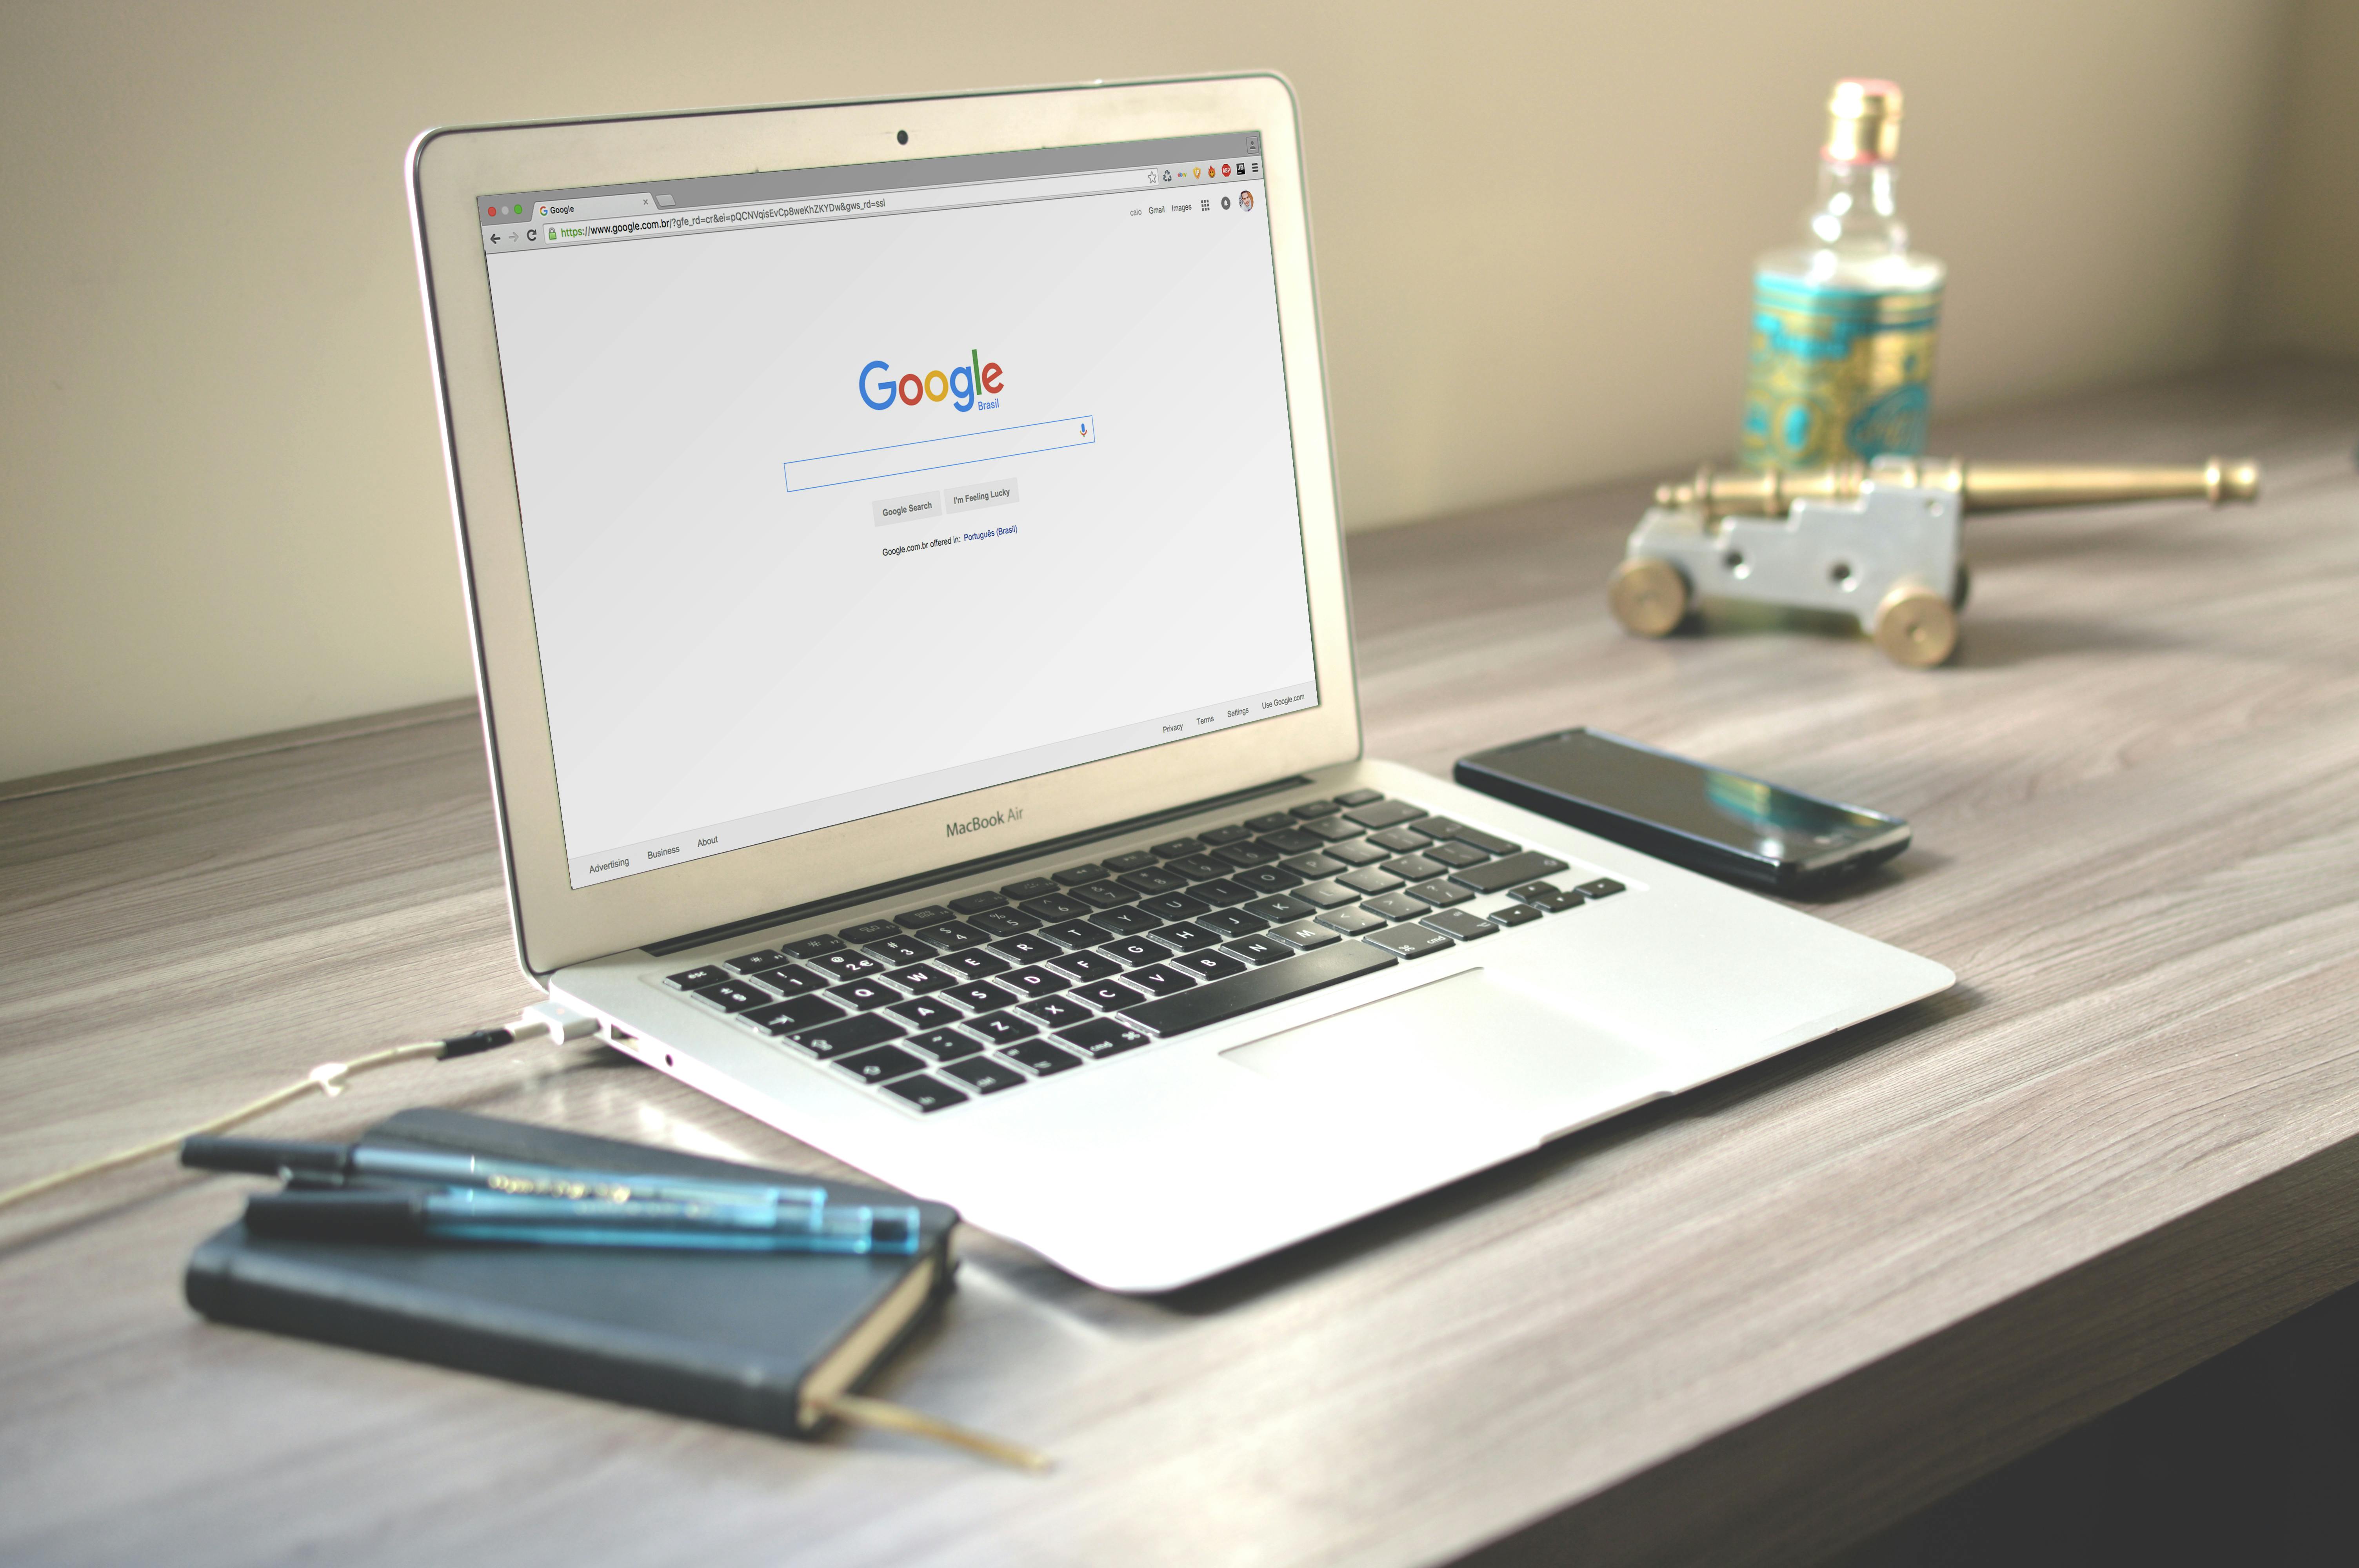 Learn the basics of SEO to bring your blog site to the top of search engines.